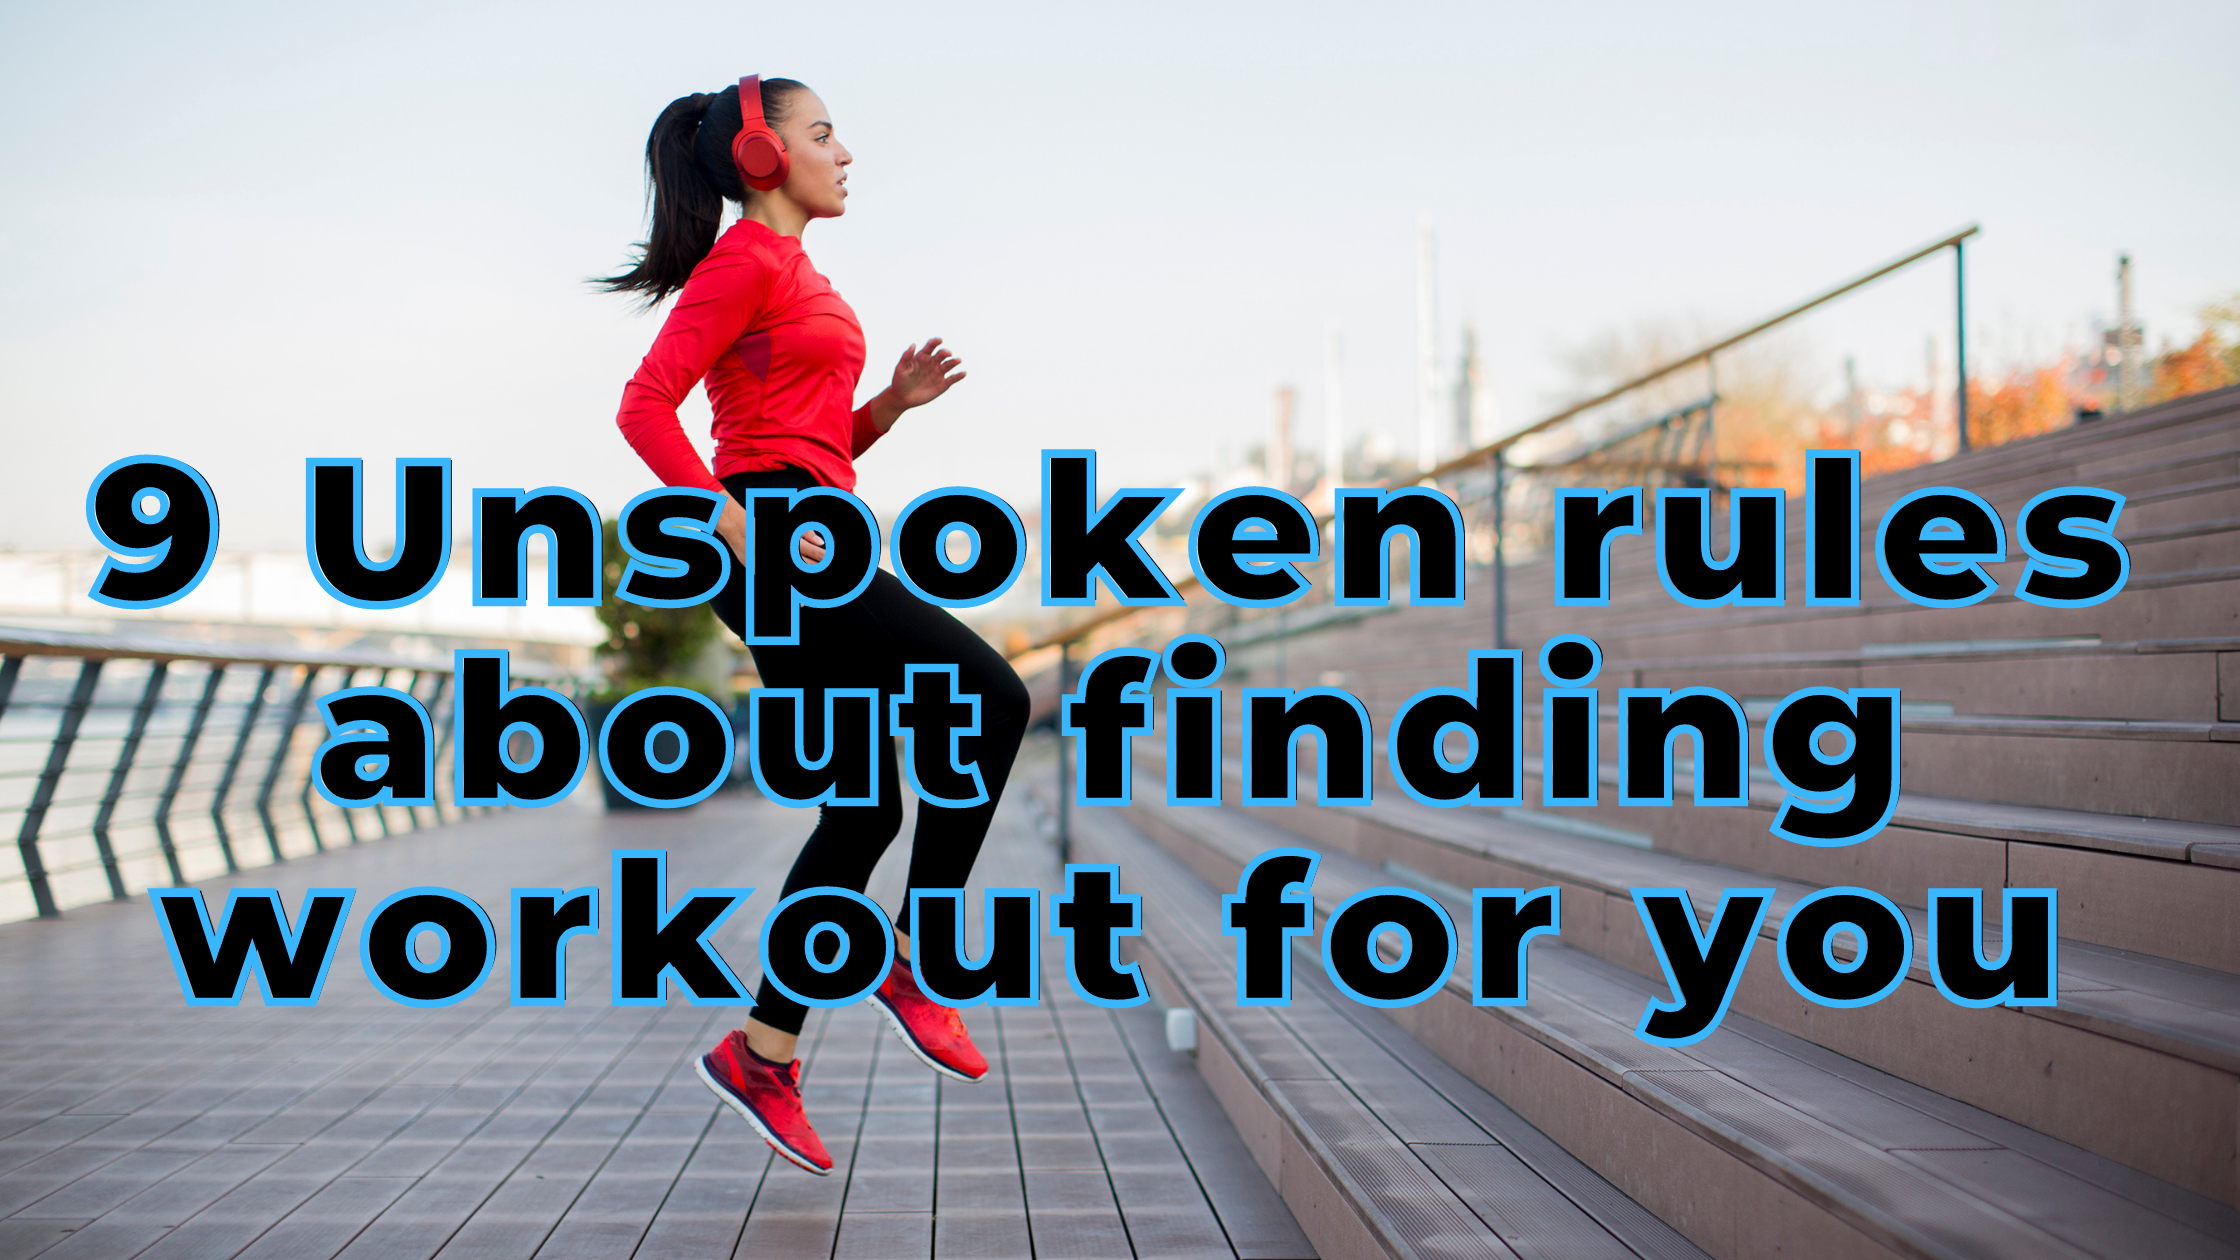 9 Unspoken rules about finding workout for you